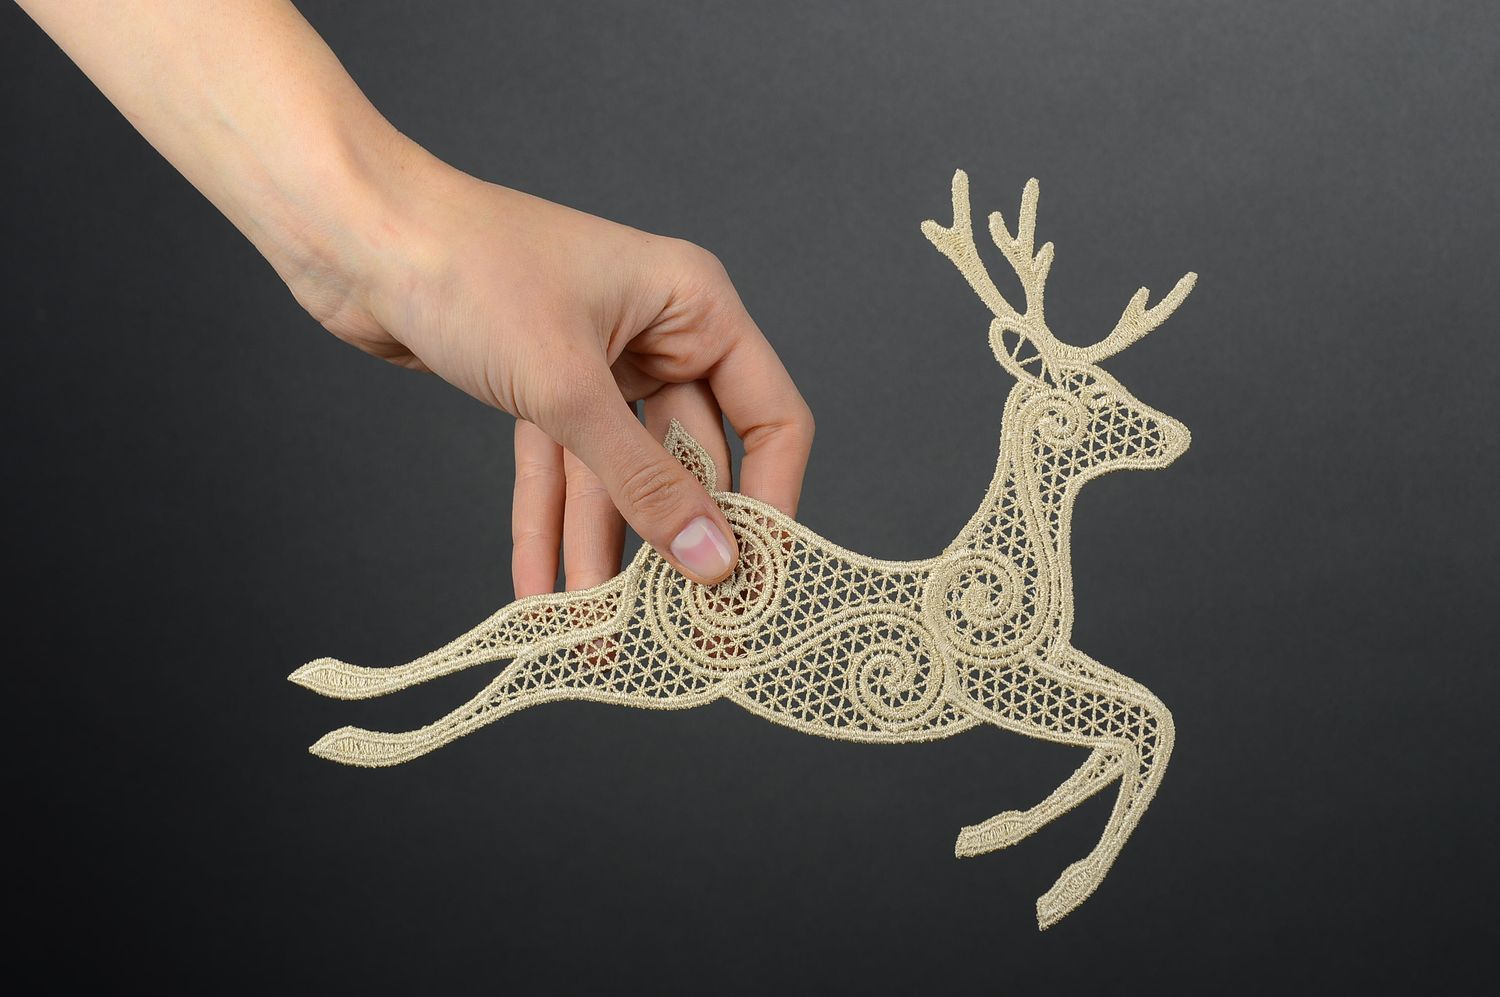 Deer Christmas toy lace toy openwork Christmas toy decorative use only photo 2